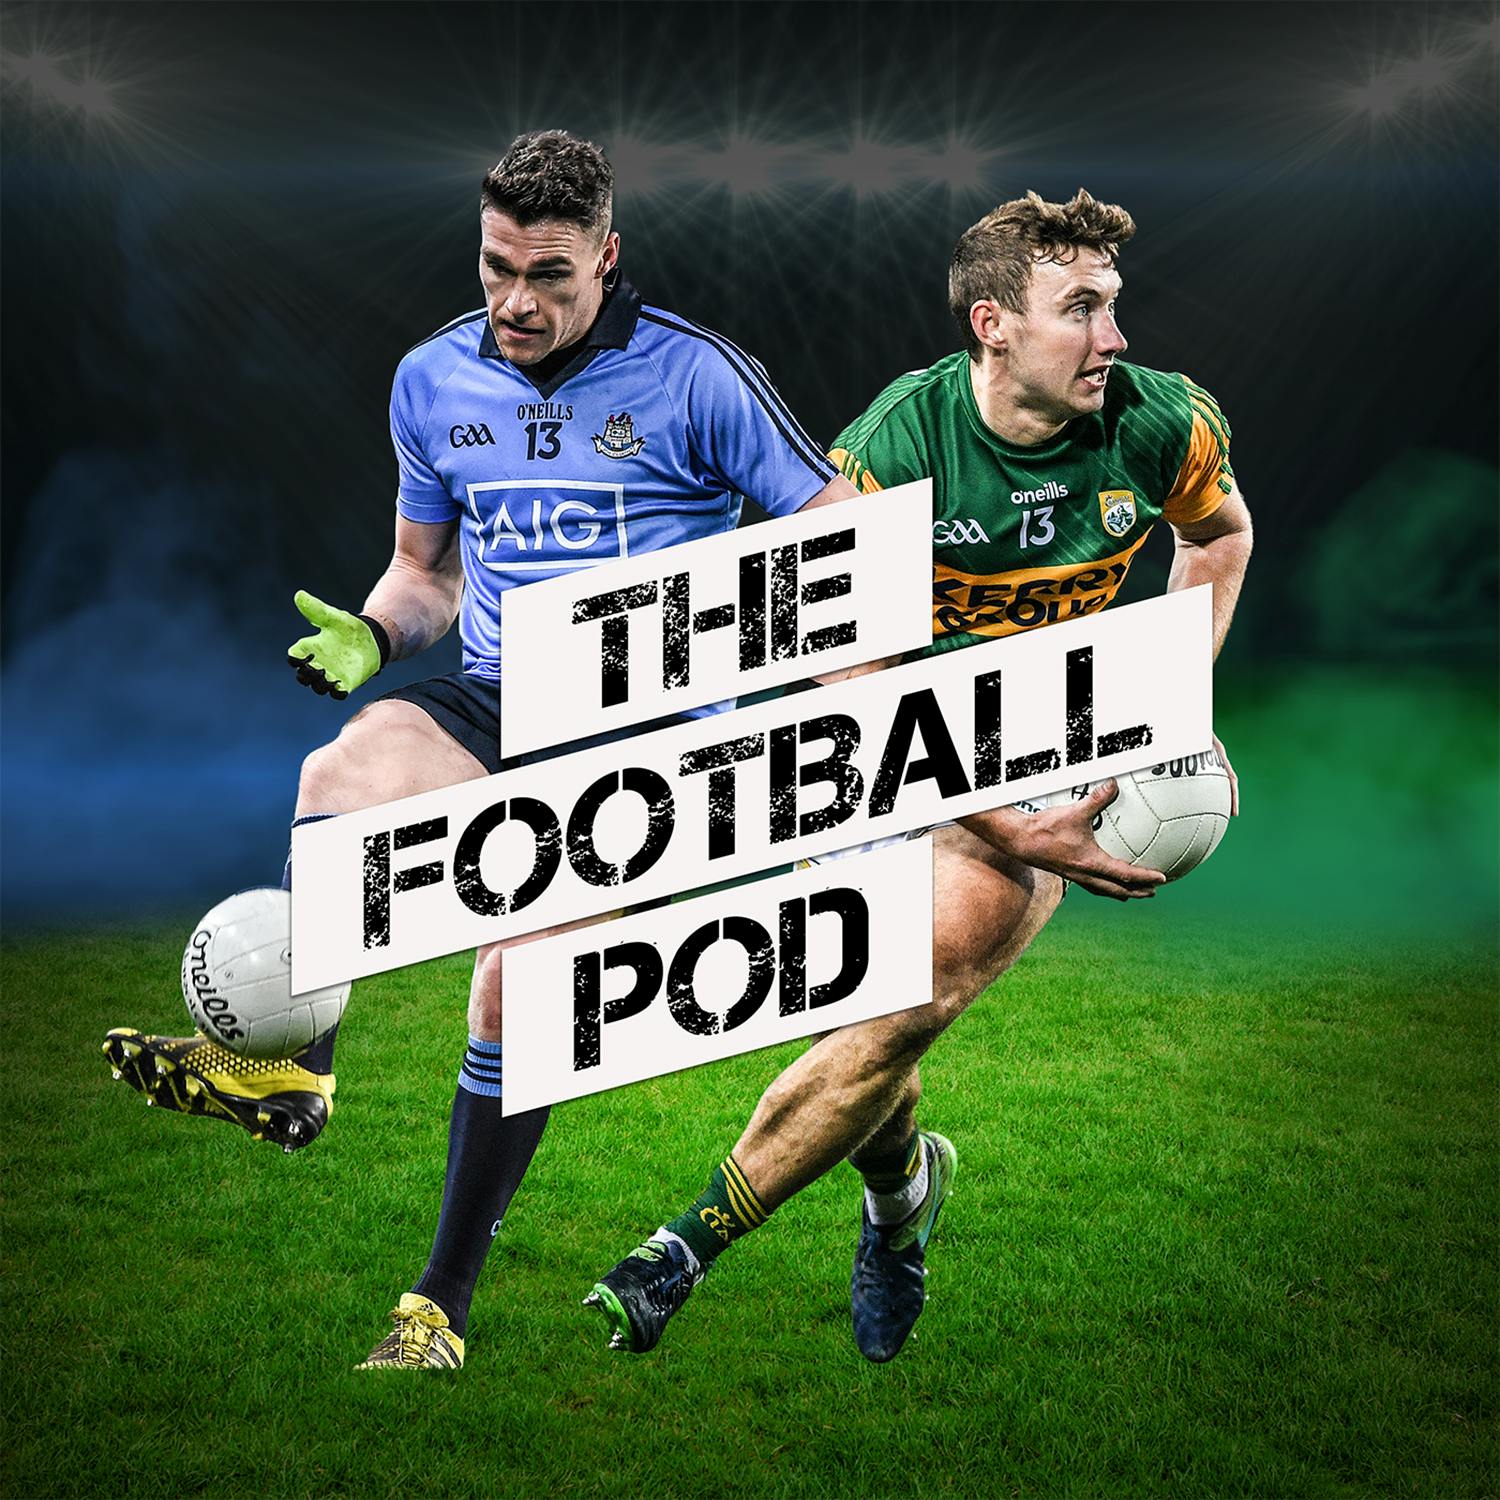 TFP members show: James and Paddy fix Gaelic Football - here's what your missing!